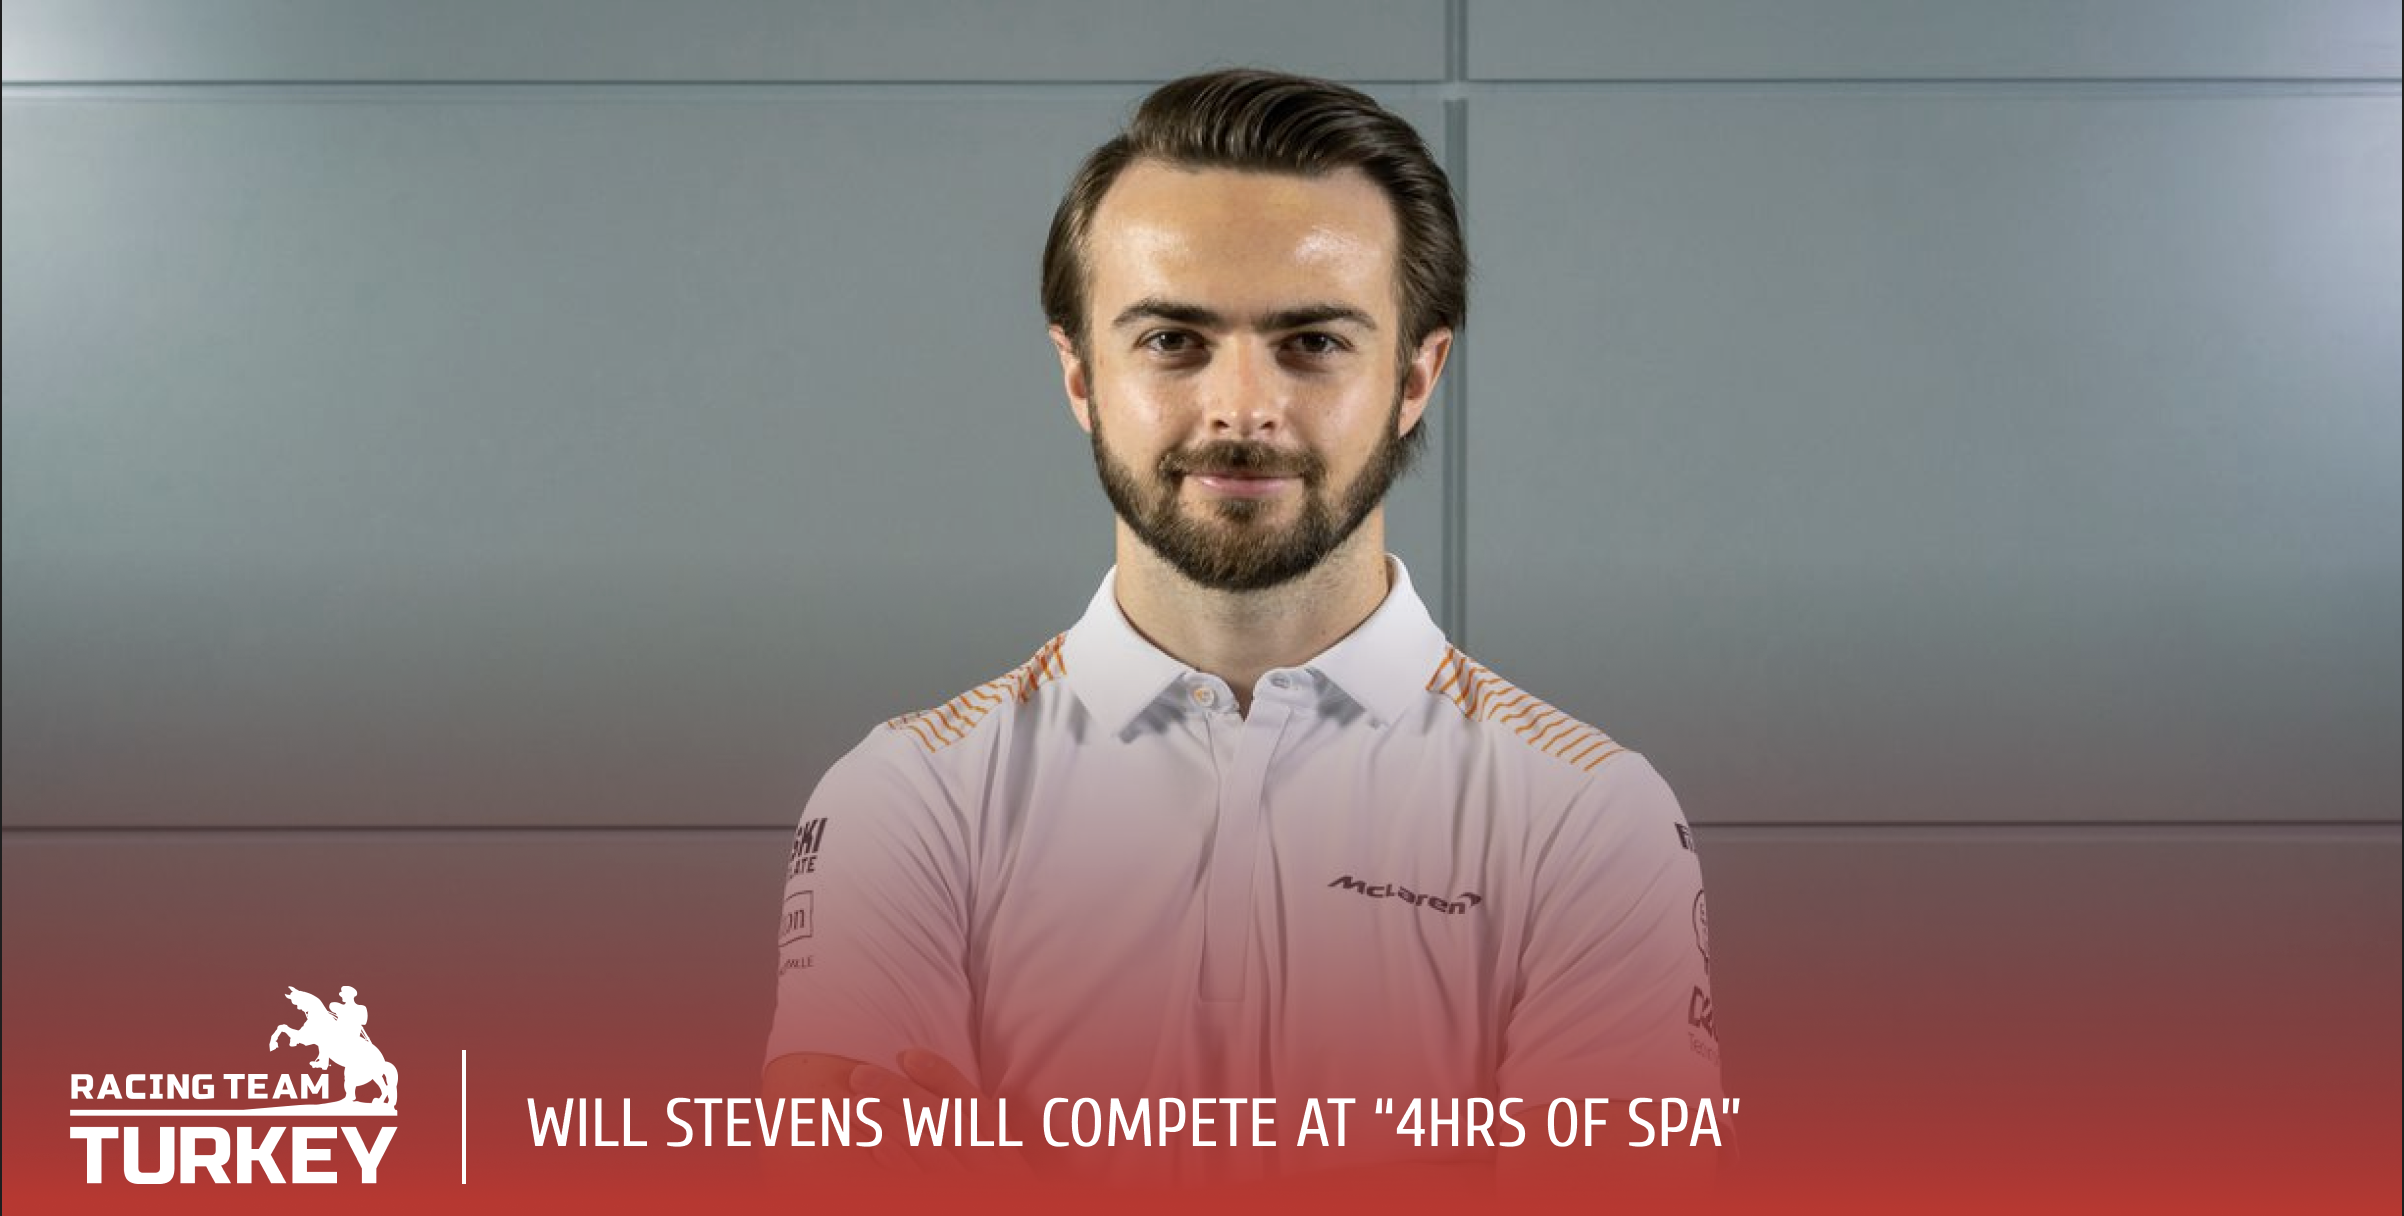 WILL STEVENS WILL COMPETE AT 4HRS OF SPA